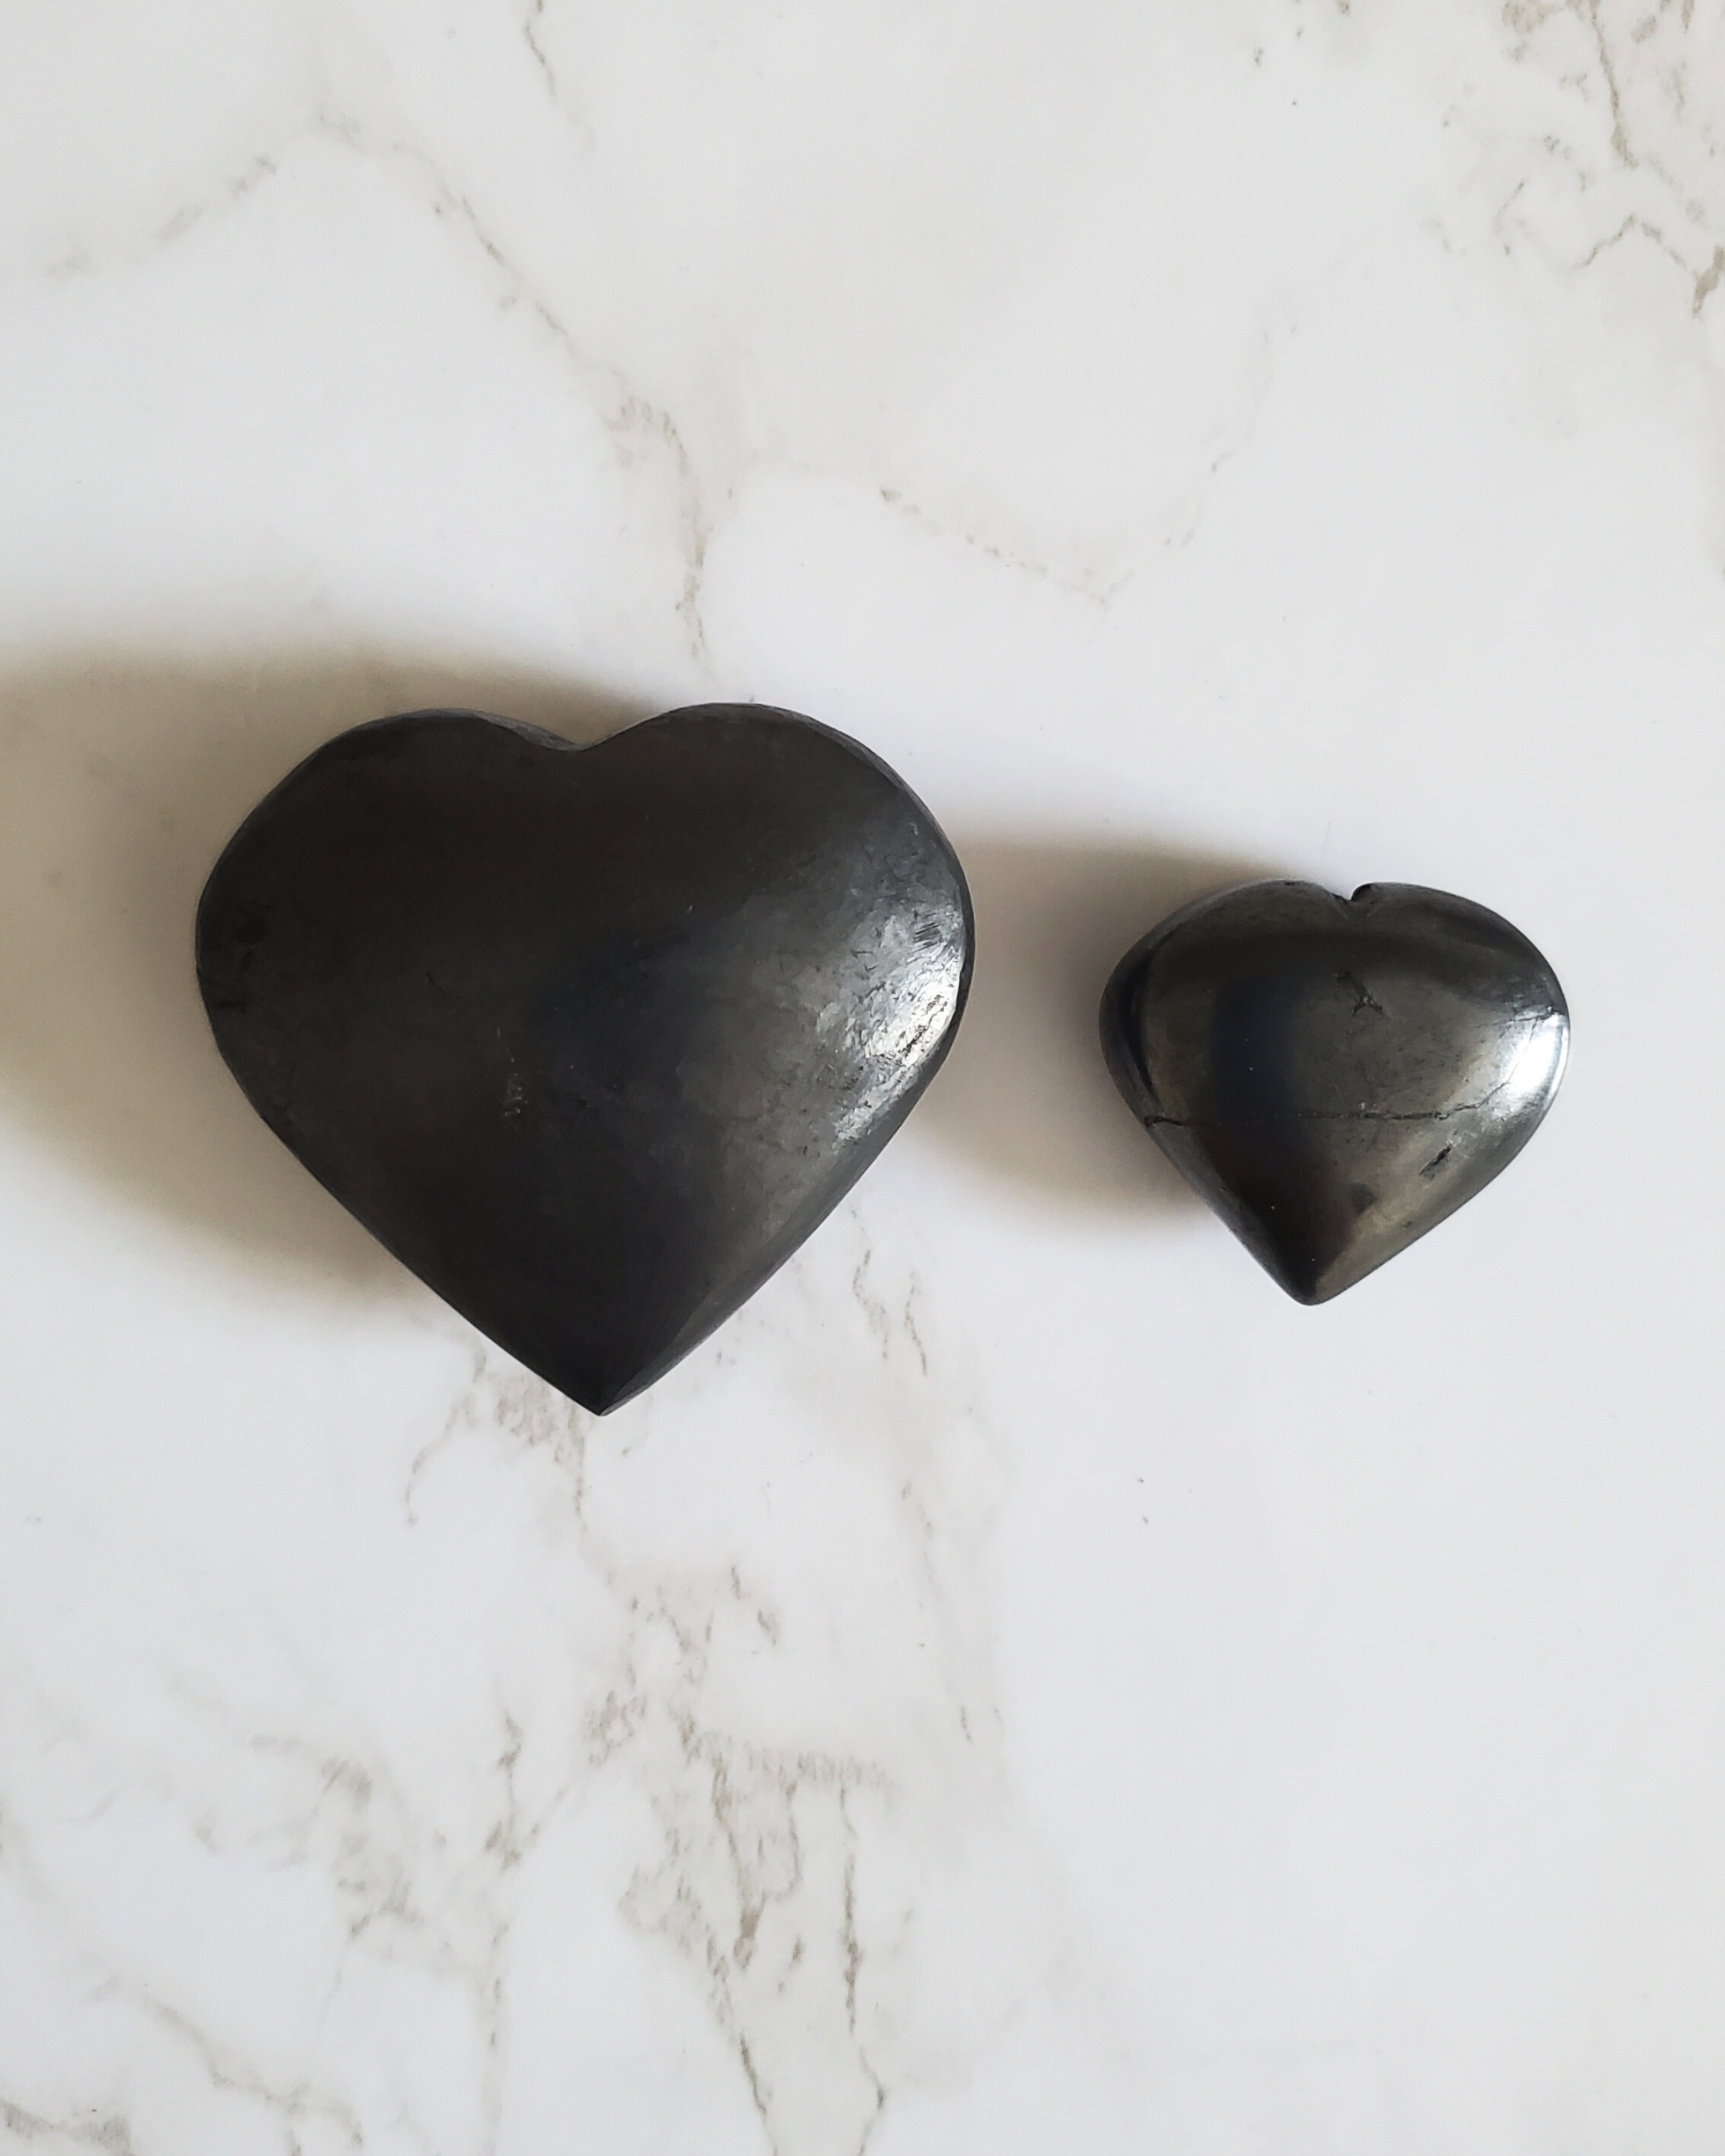 Natural Pain Relief and Protection from 5G and EMFs Shungite Hearts 2 sizes